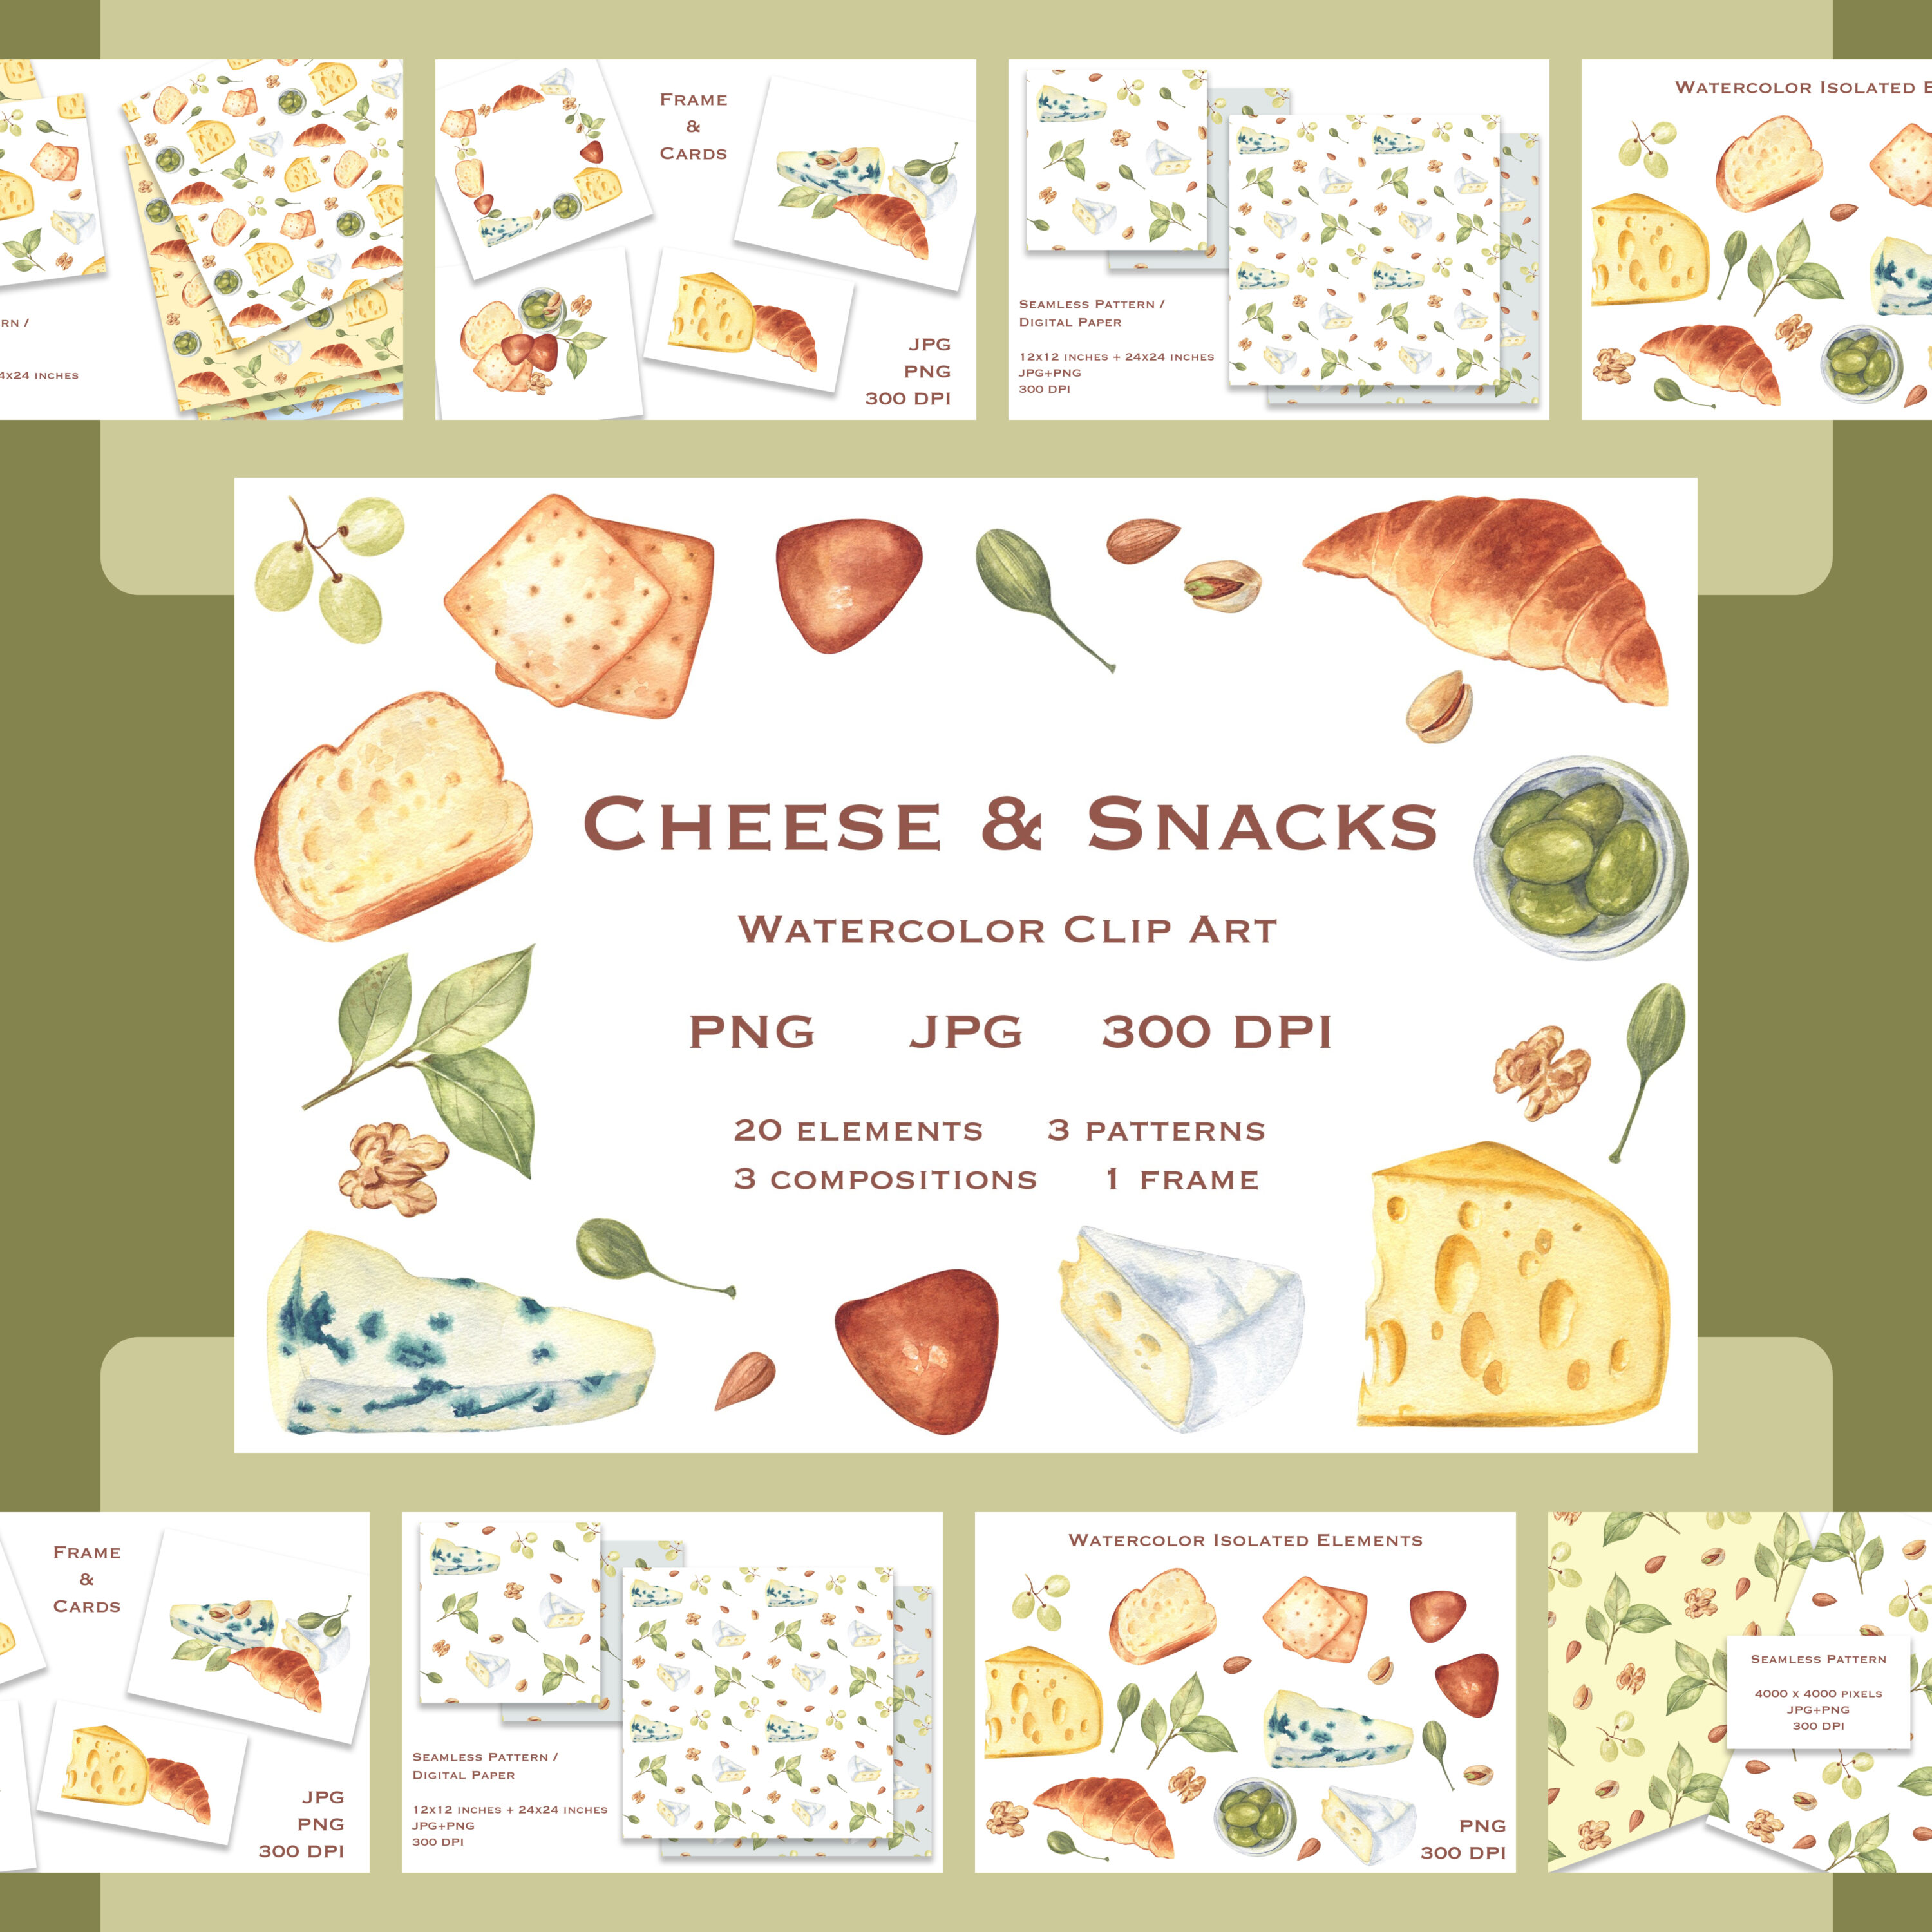 Preview cheese and snacks. watercolor clipart patterns.